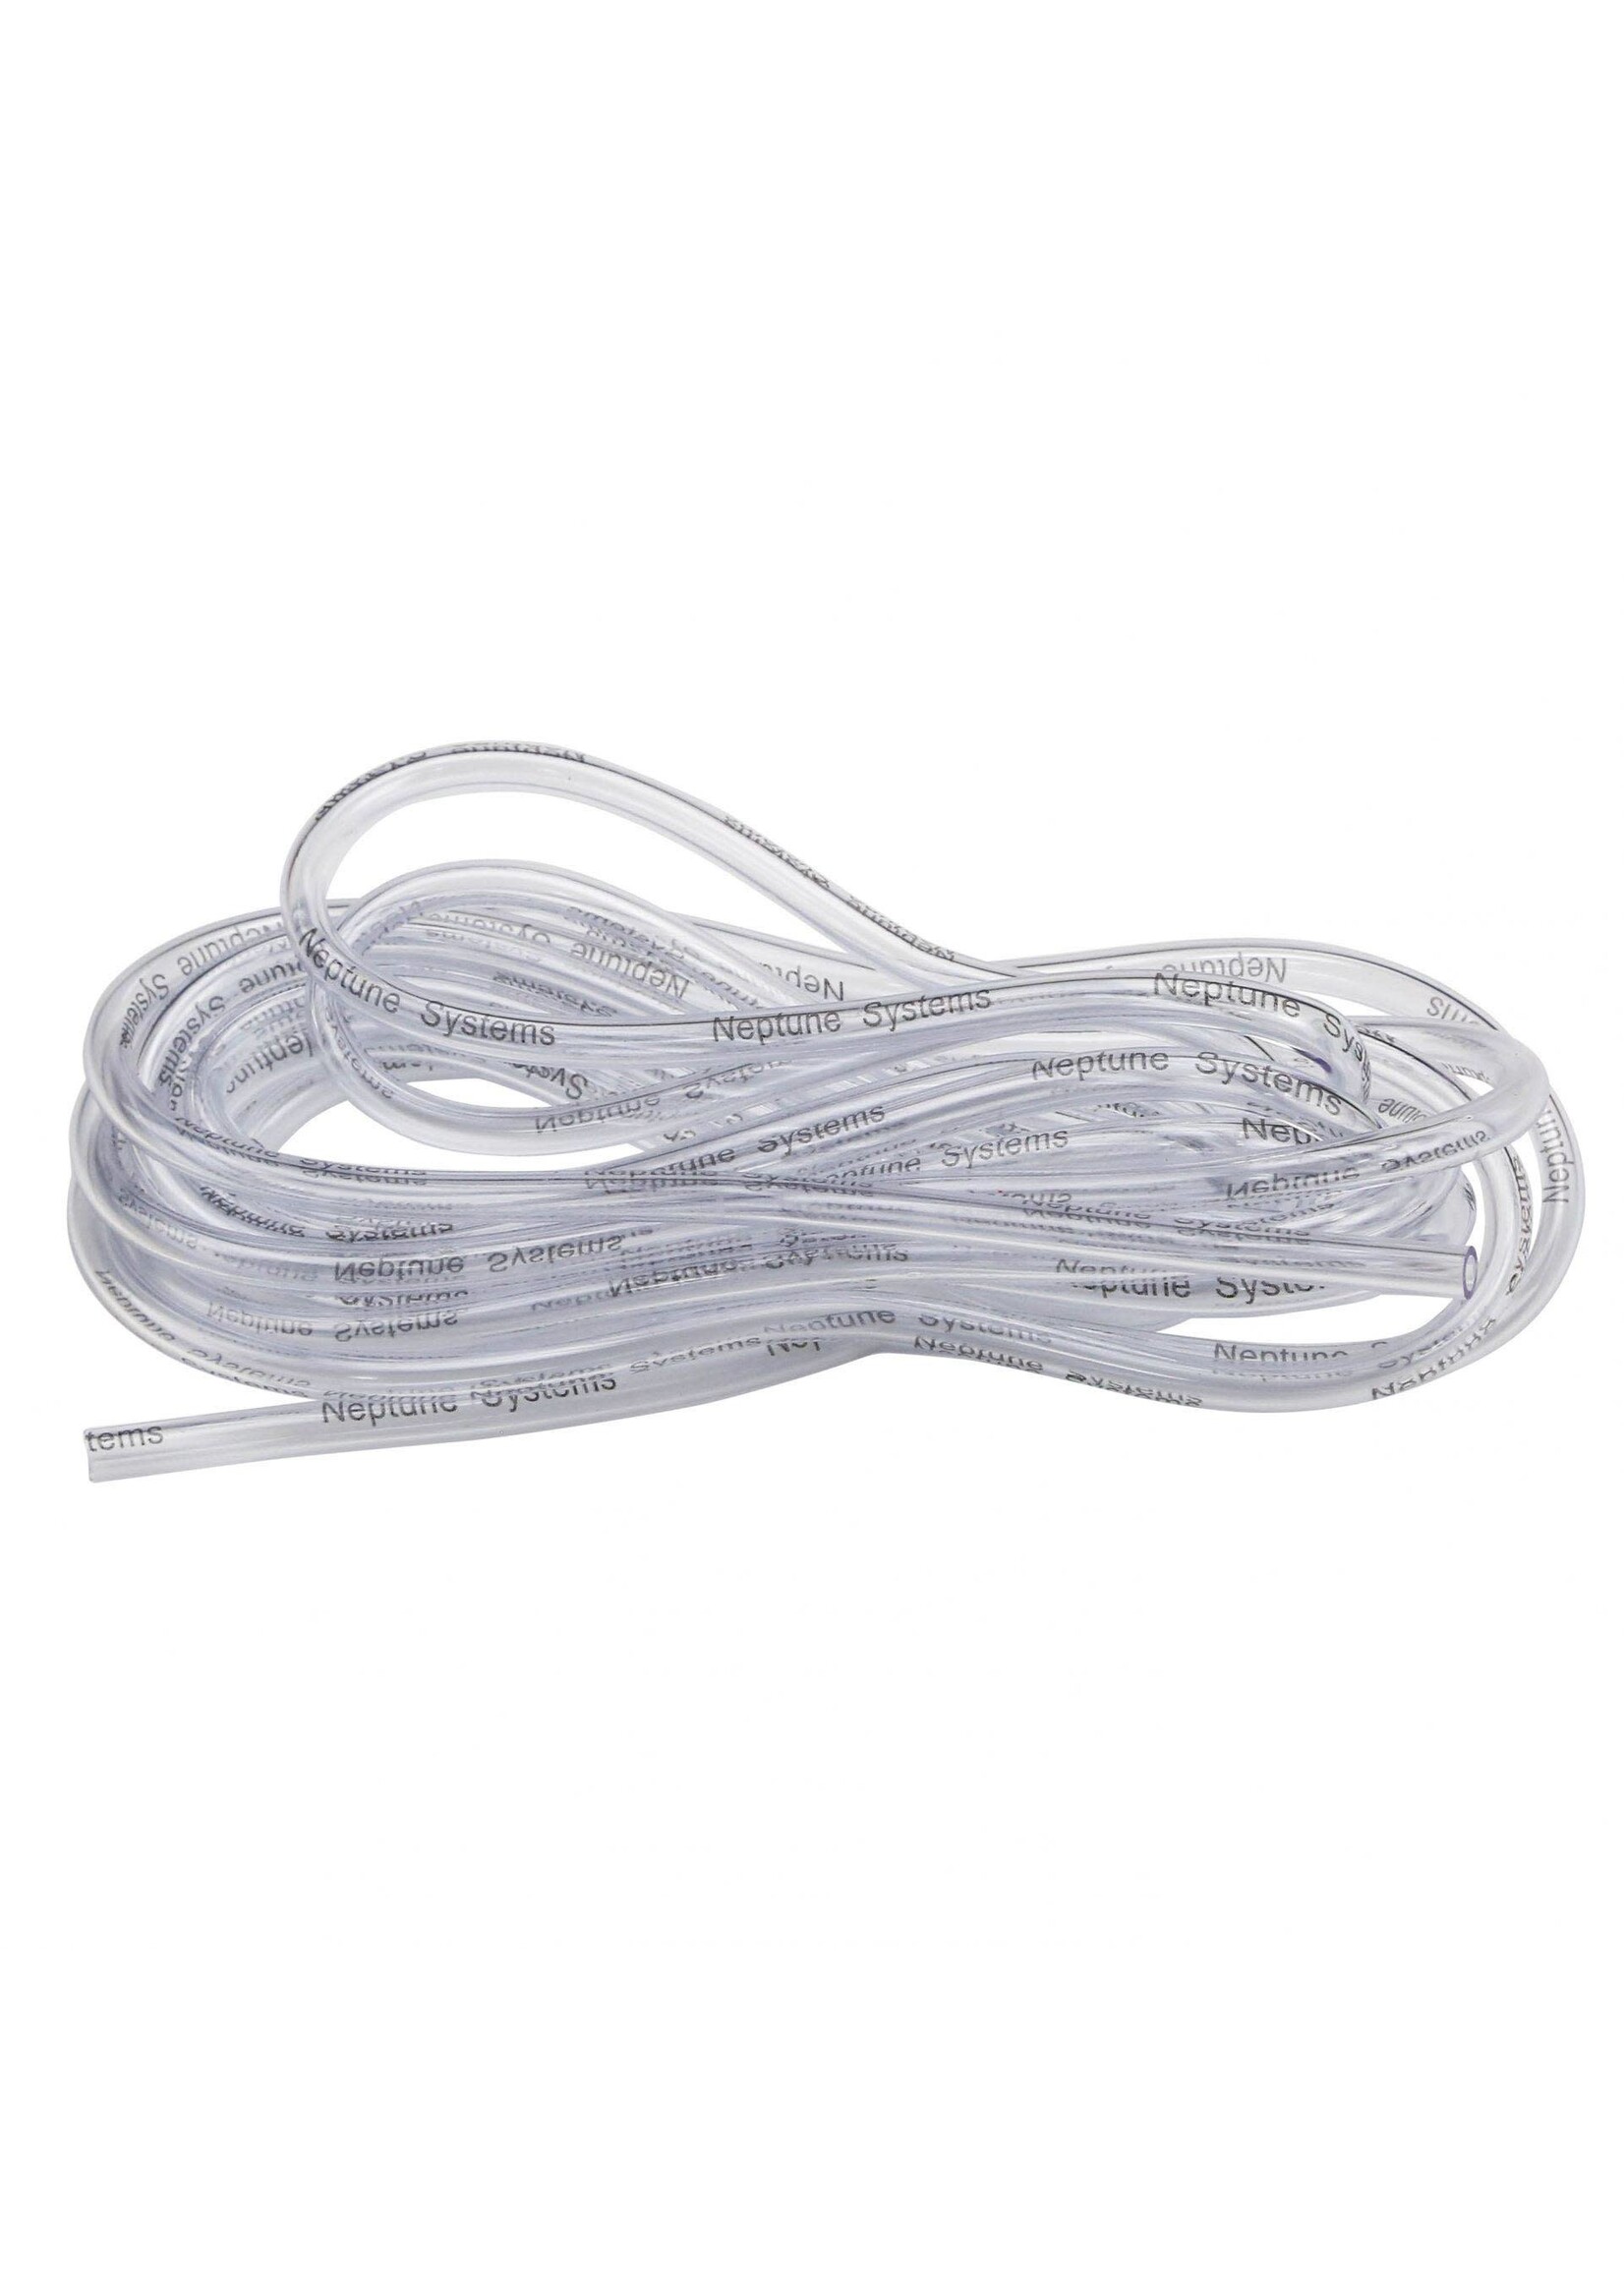 Neptune System DOS REPLACEMENT TUBING 4 METER